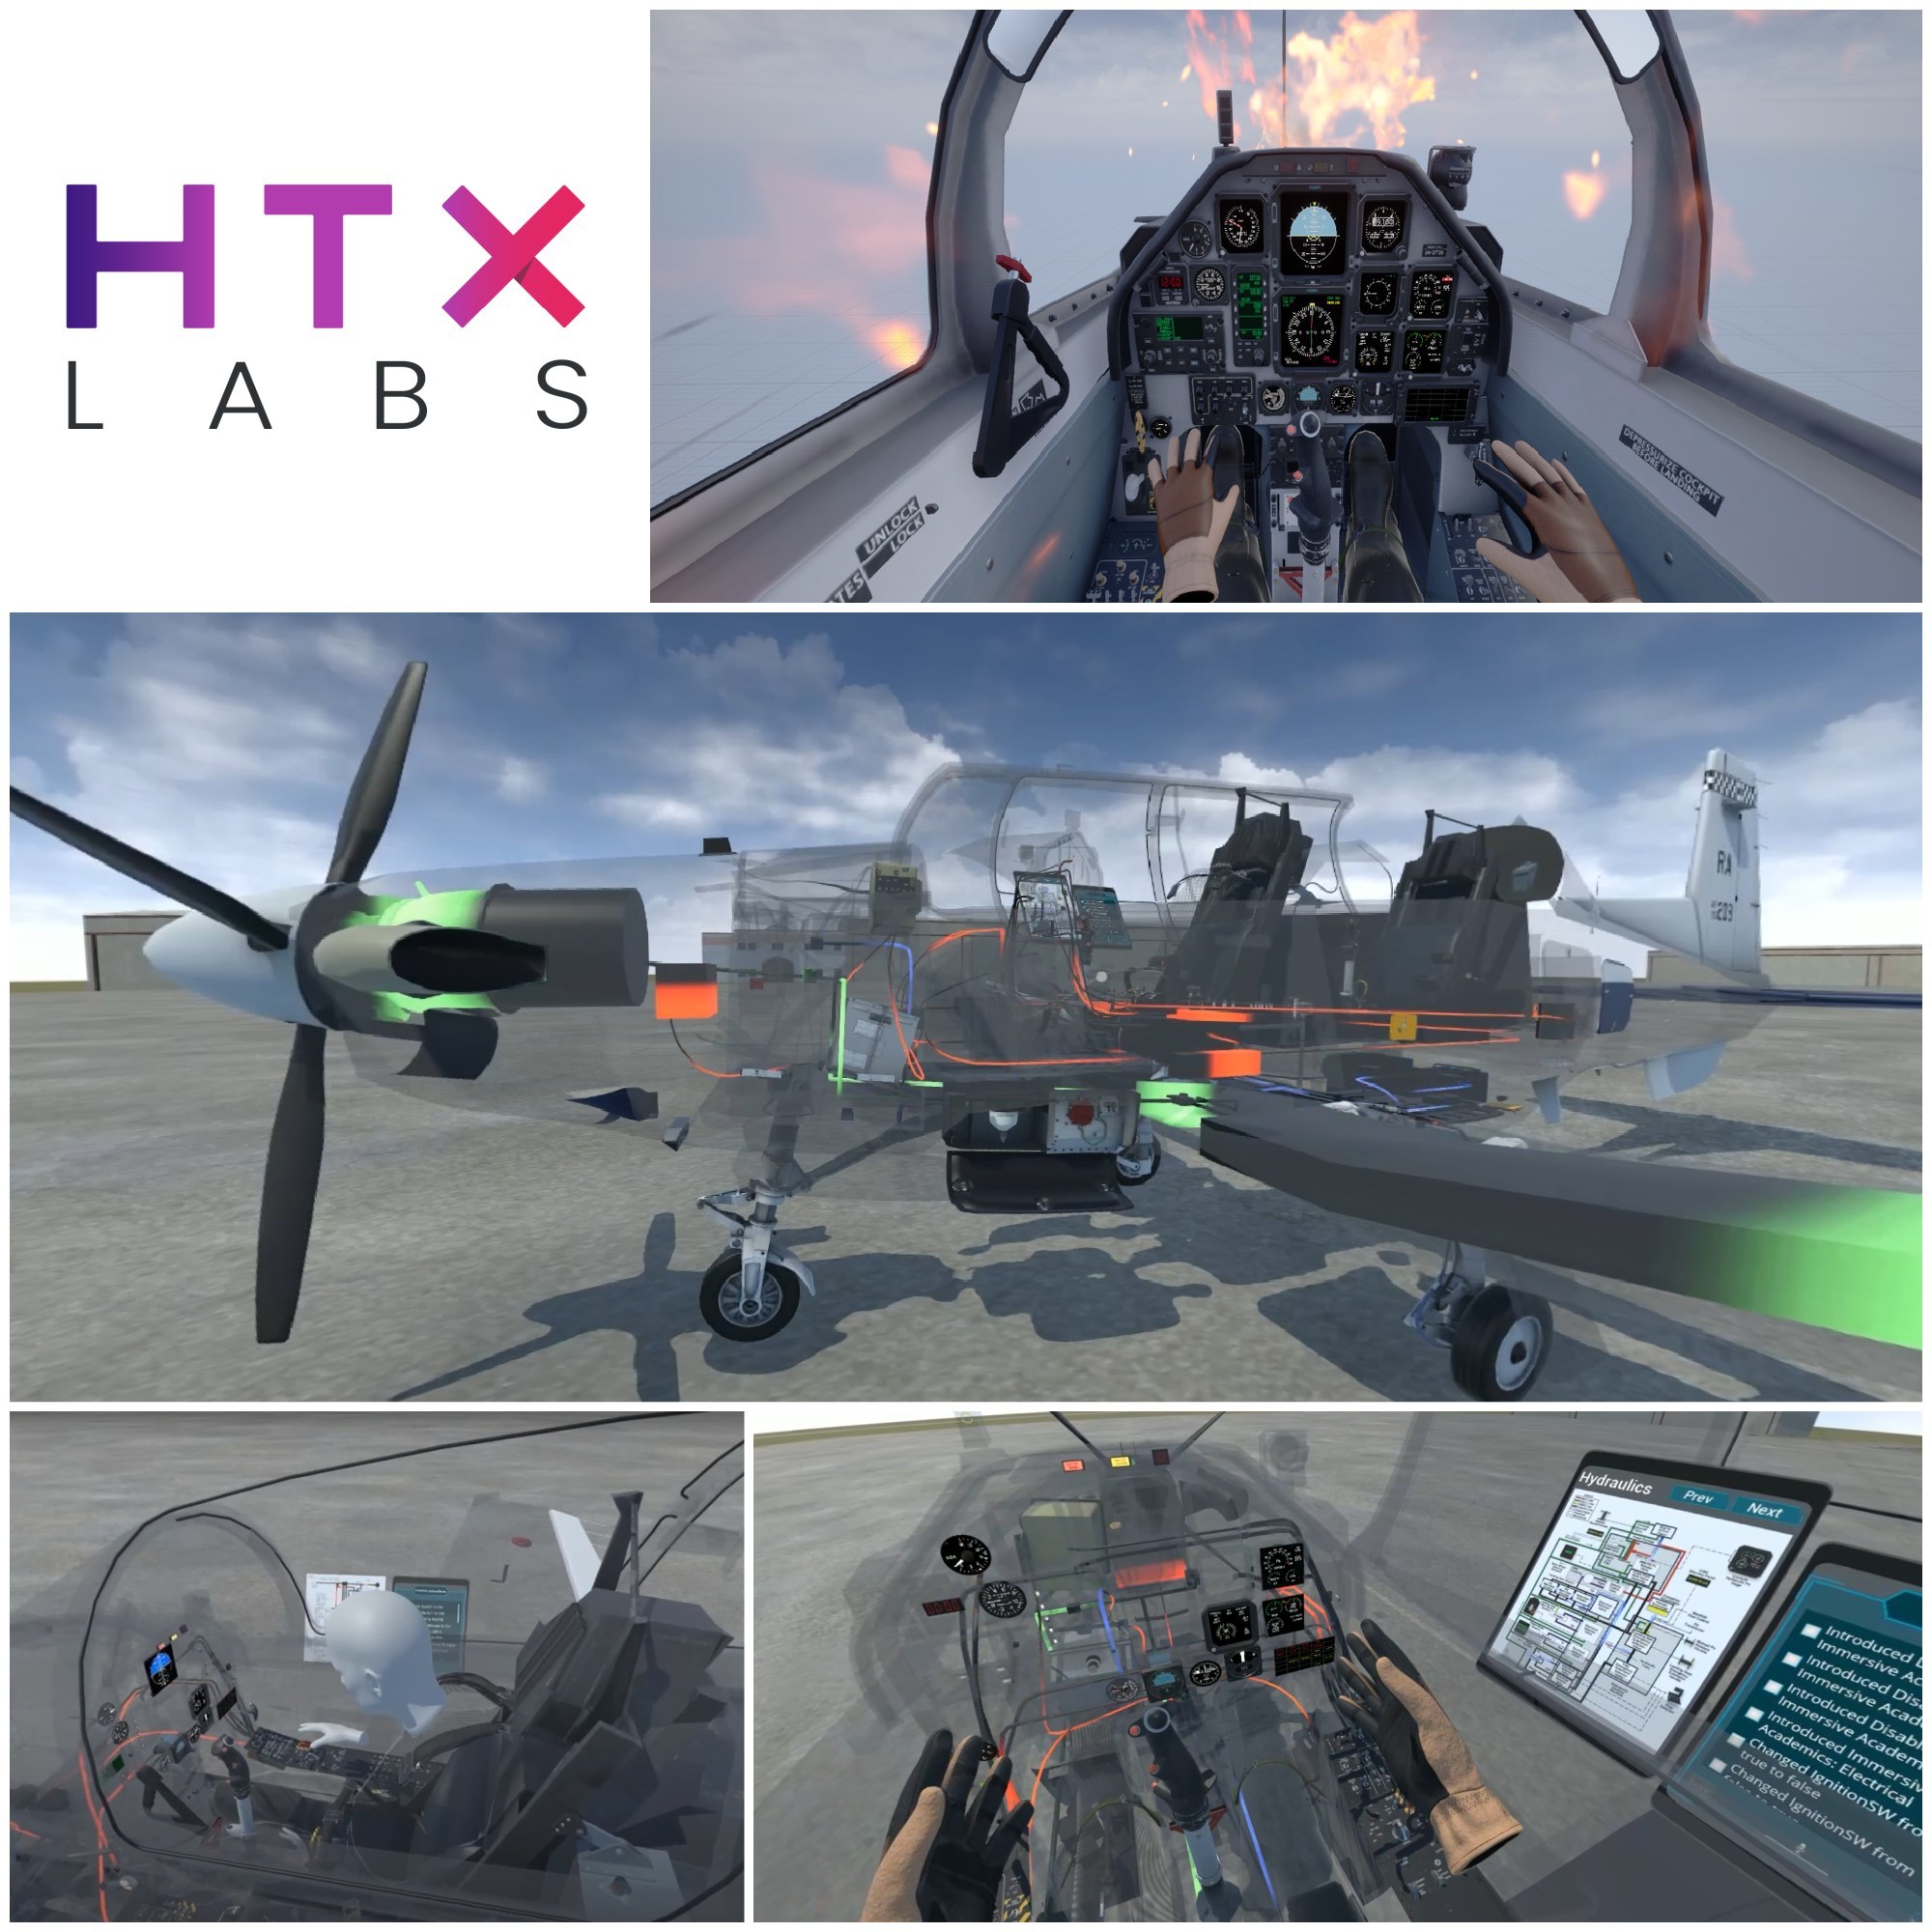 HTX Labs' interactive, virtual T-6 delivers high-fidelity, immersive academics training